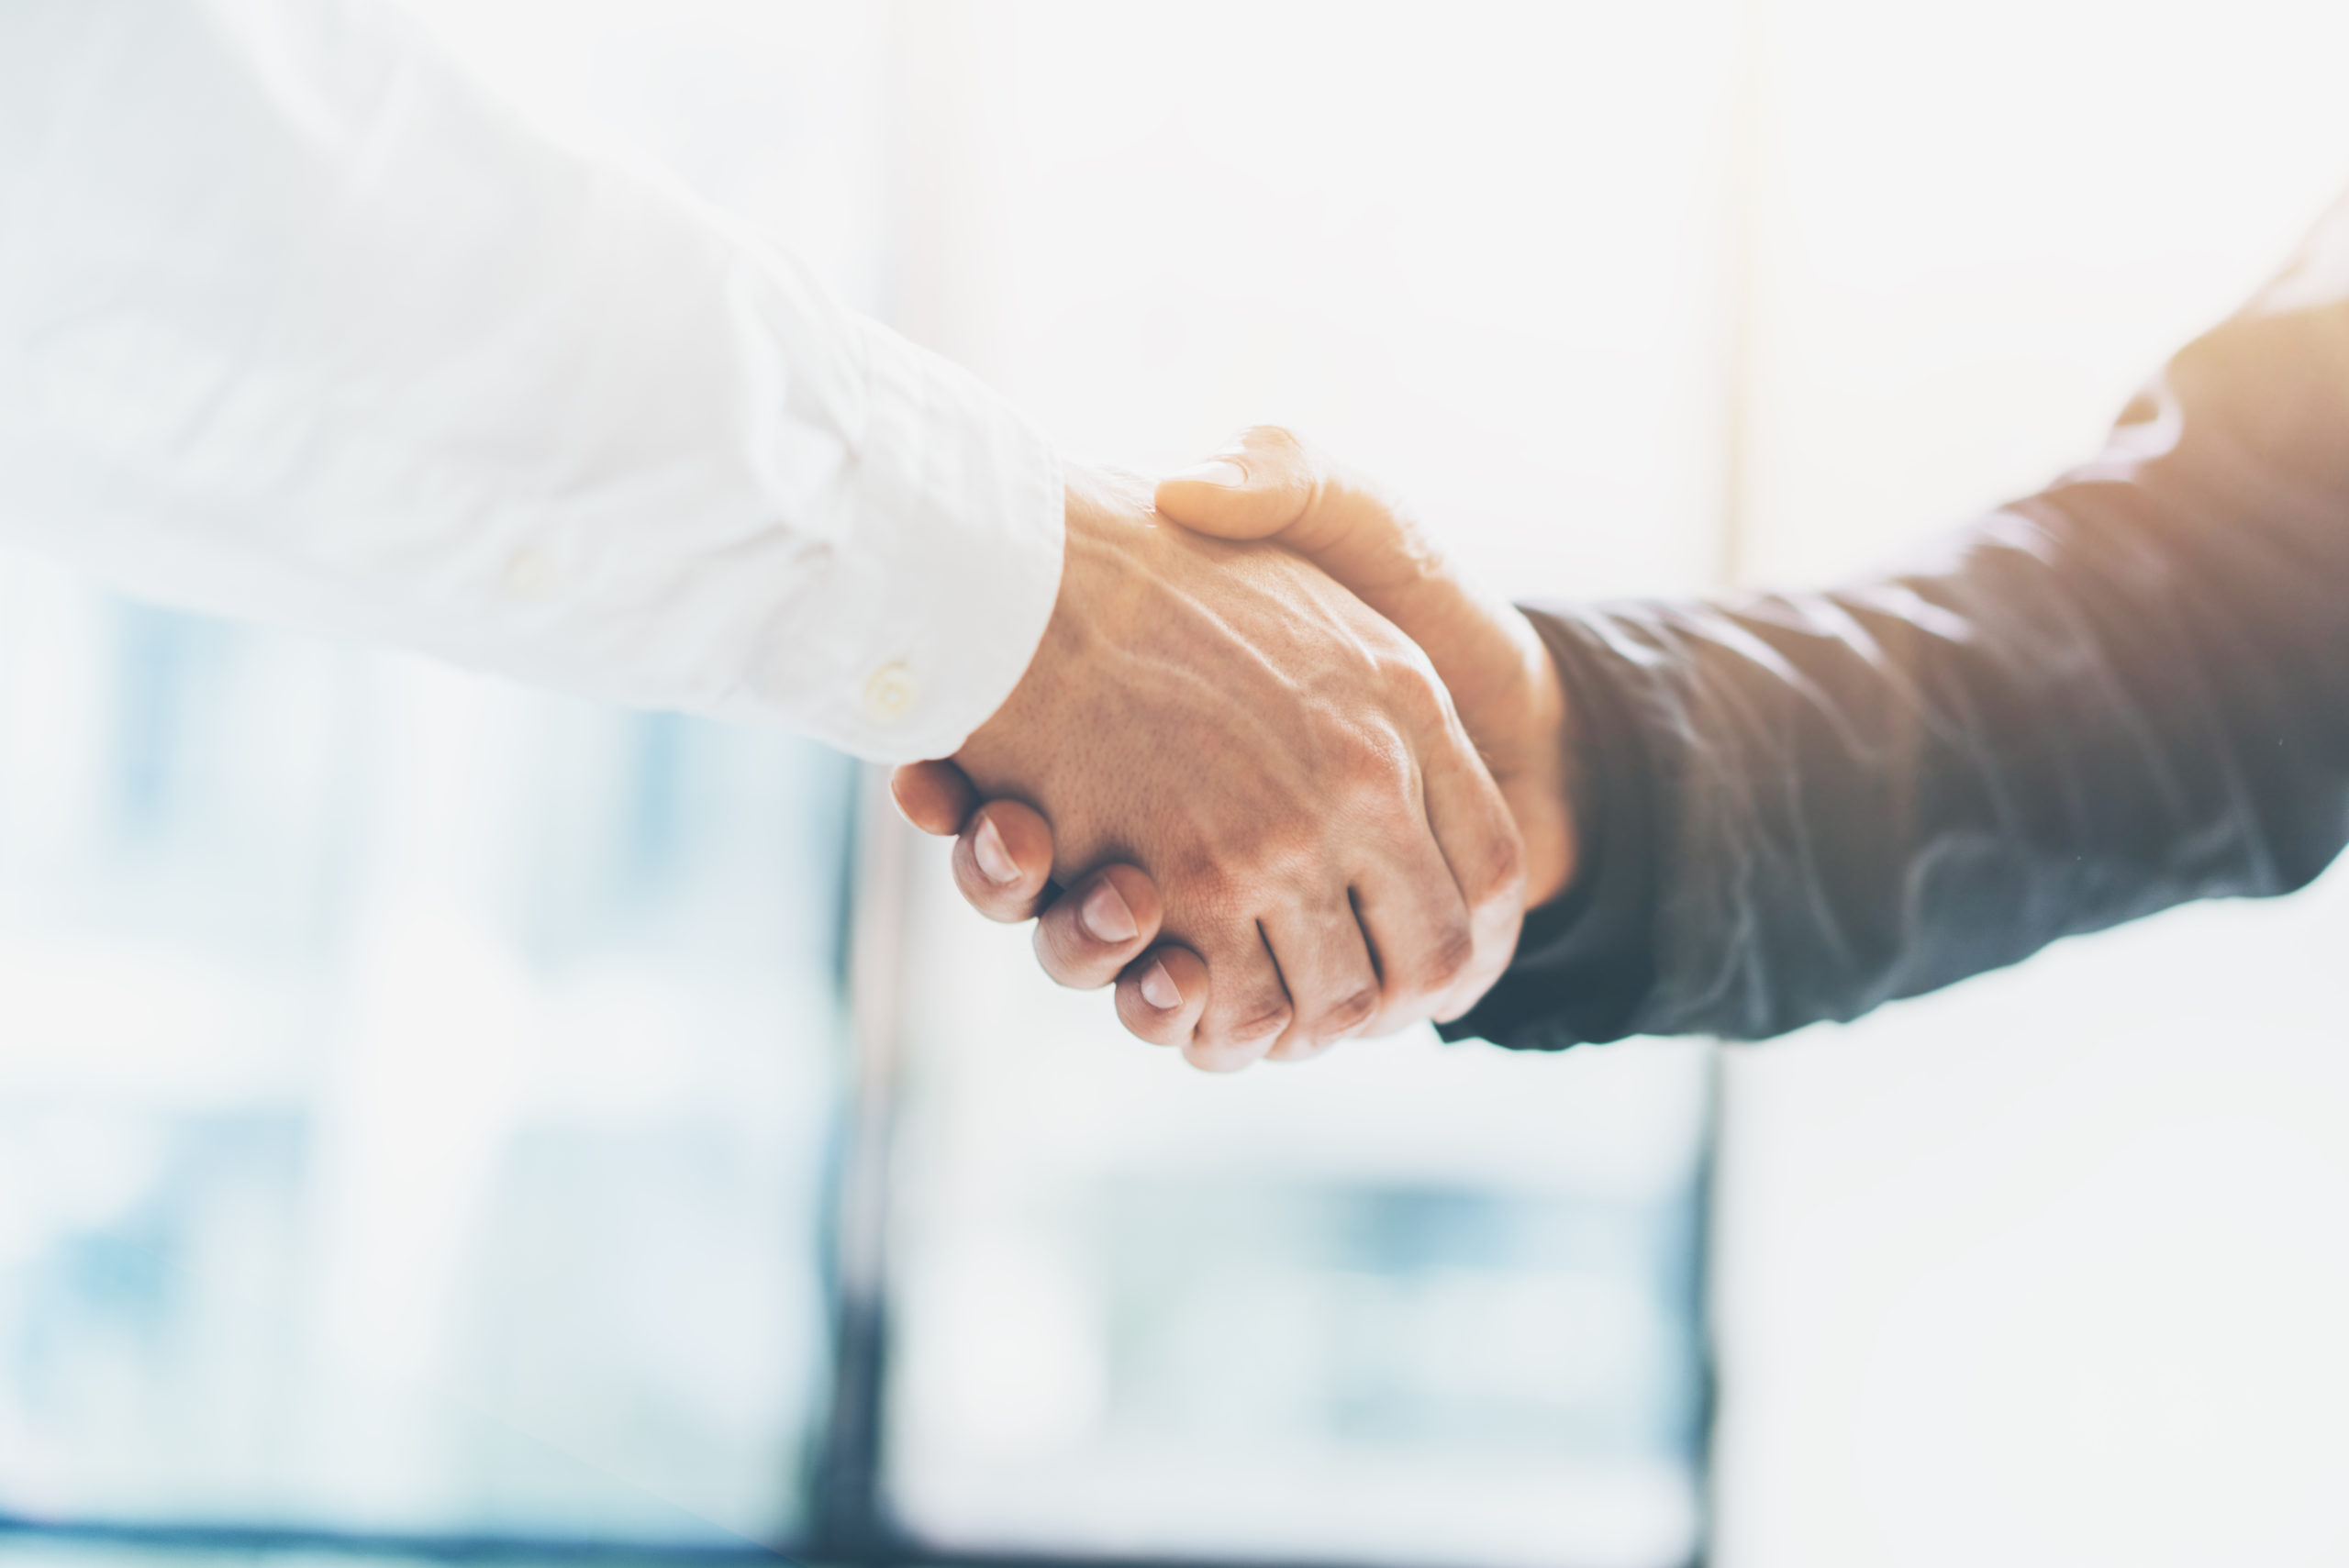 How Can I Convert A Traditional Partnership To An LLP?